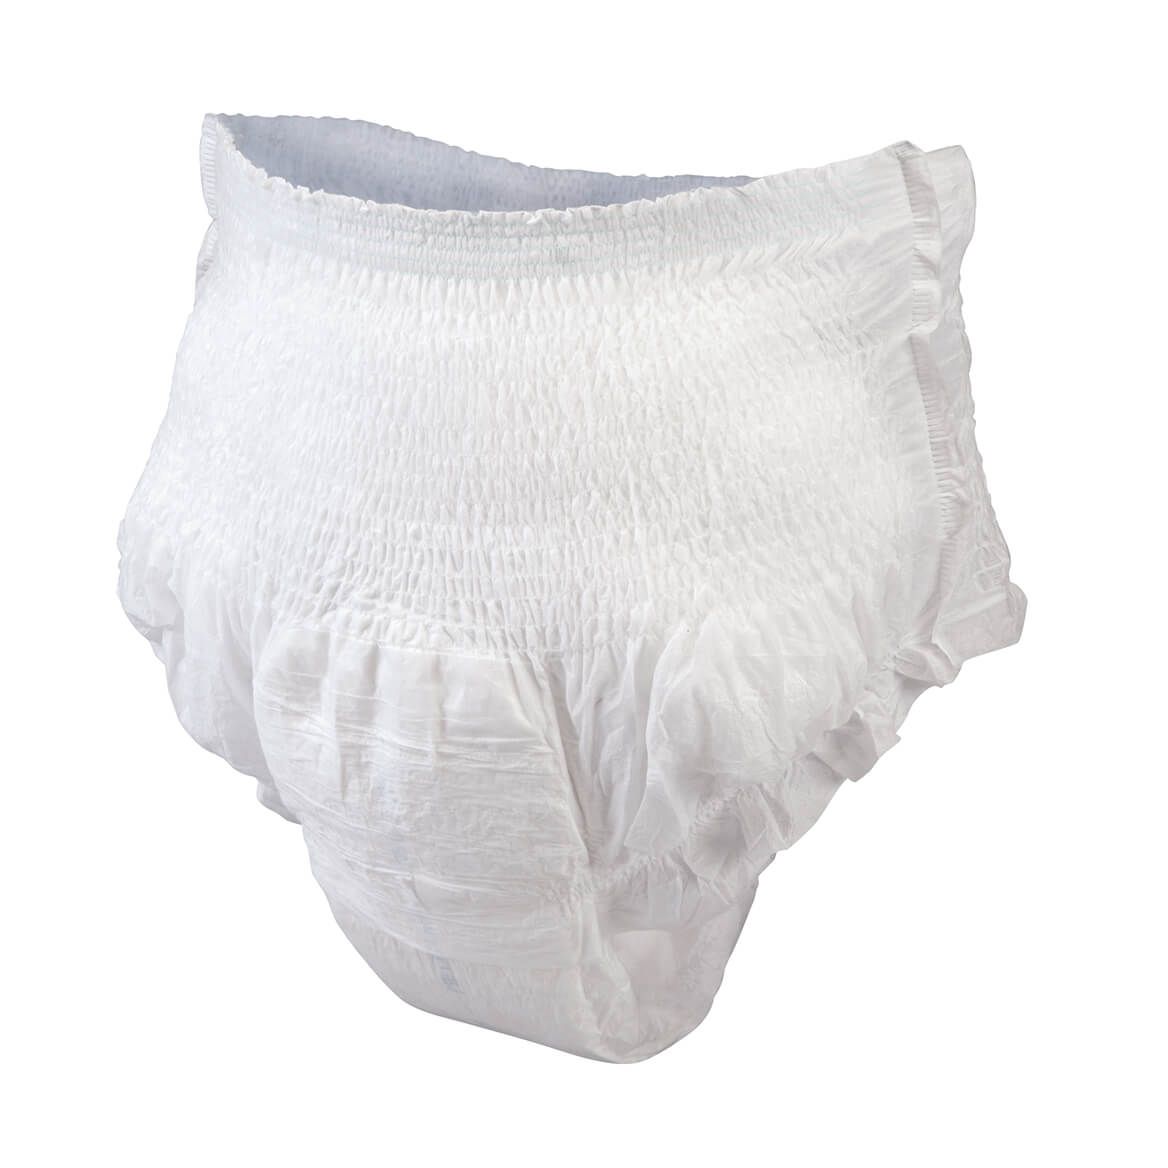 Unisex Protective Underwear, Trial Pack + '-' + 357312